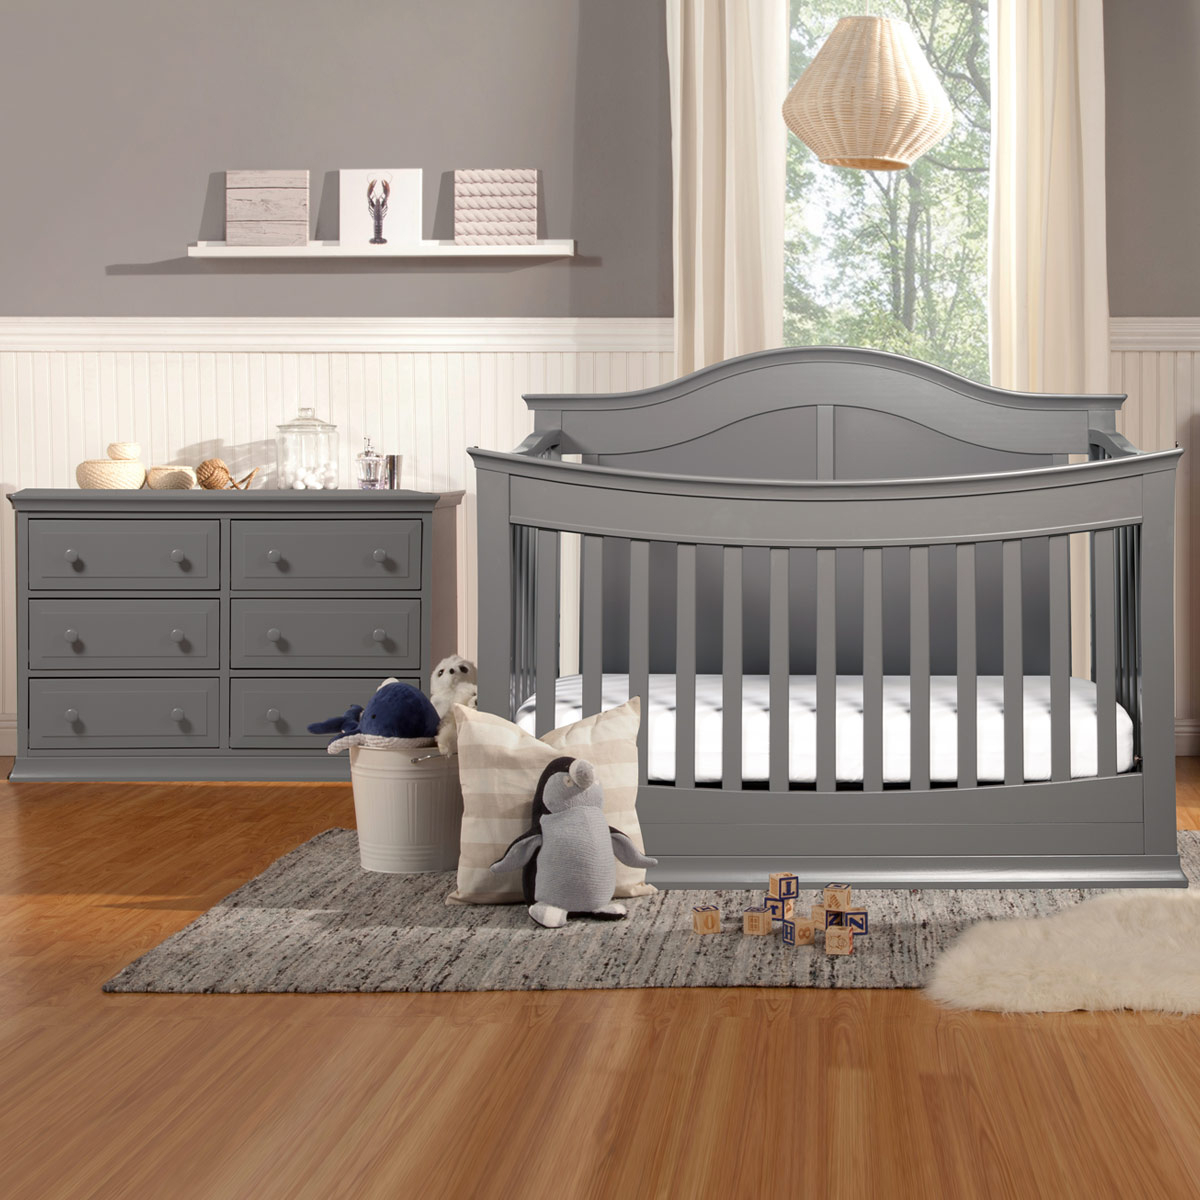 Davinci Meadow 2 Piece Nursery Set 4 In 1 Convertible Crib And Signature 6 Drawer Double Dresser In Slate in sizing 1200 X 1200